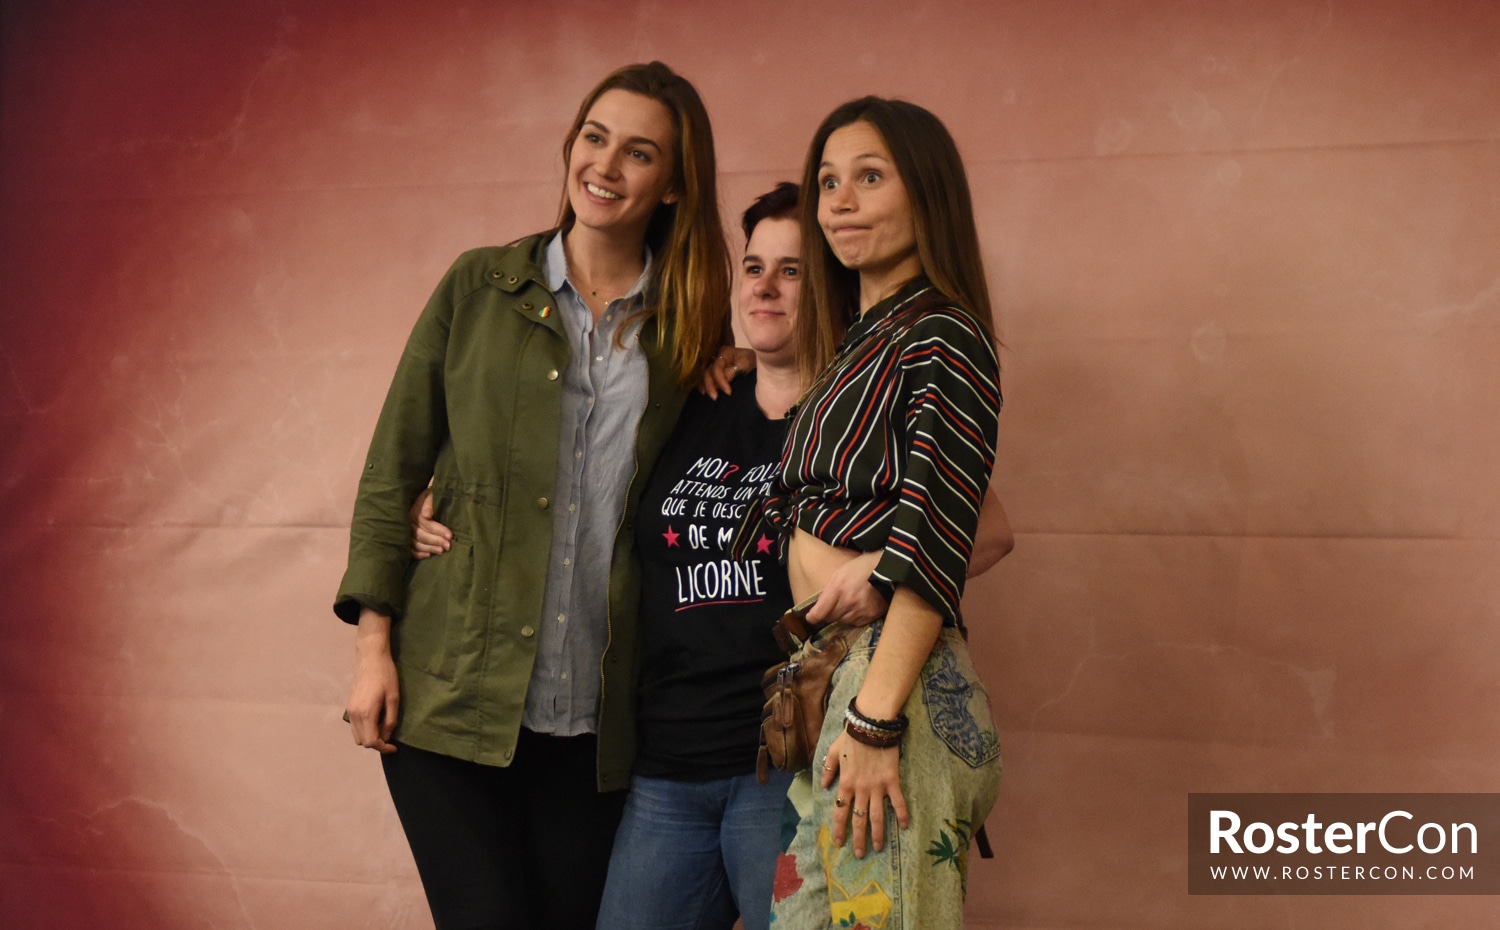 Katherine Barrell & Dominique Provost-Chalkley - Our Stripes Are Beautiful - Wynonna Earp